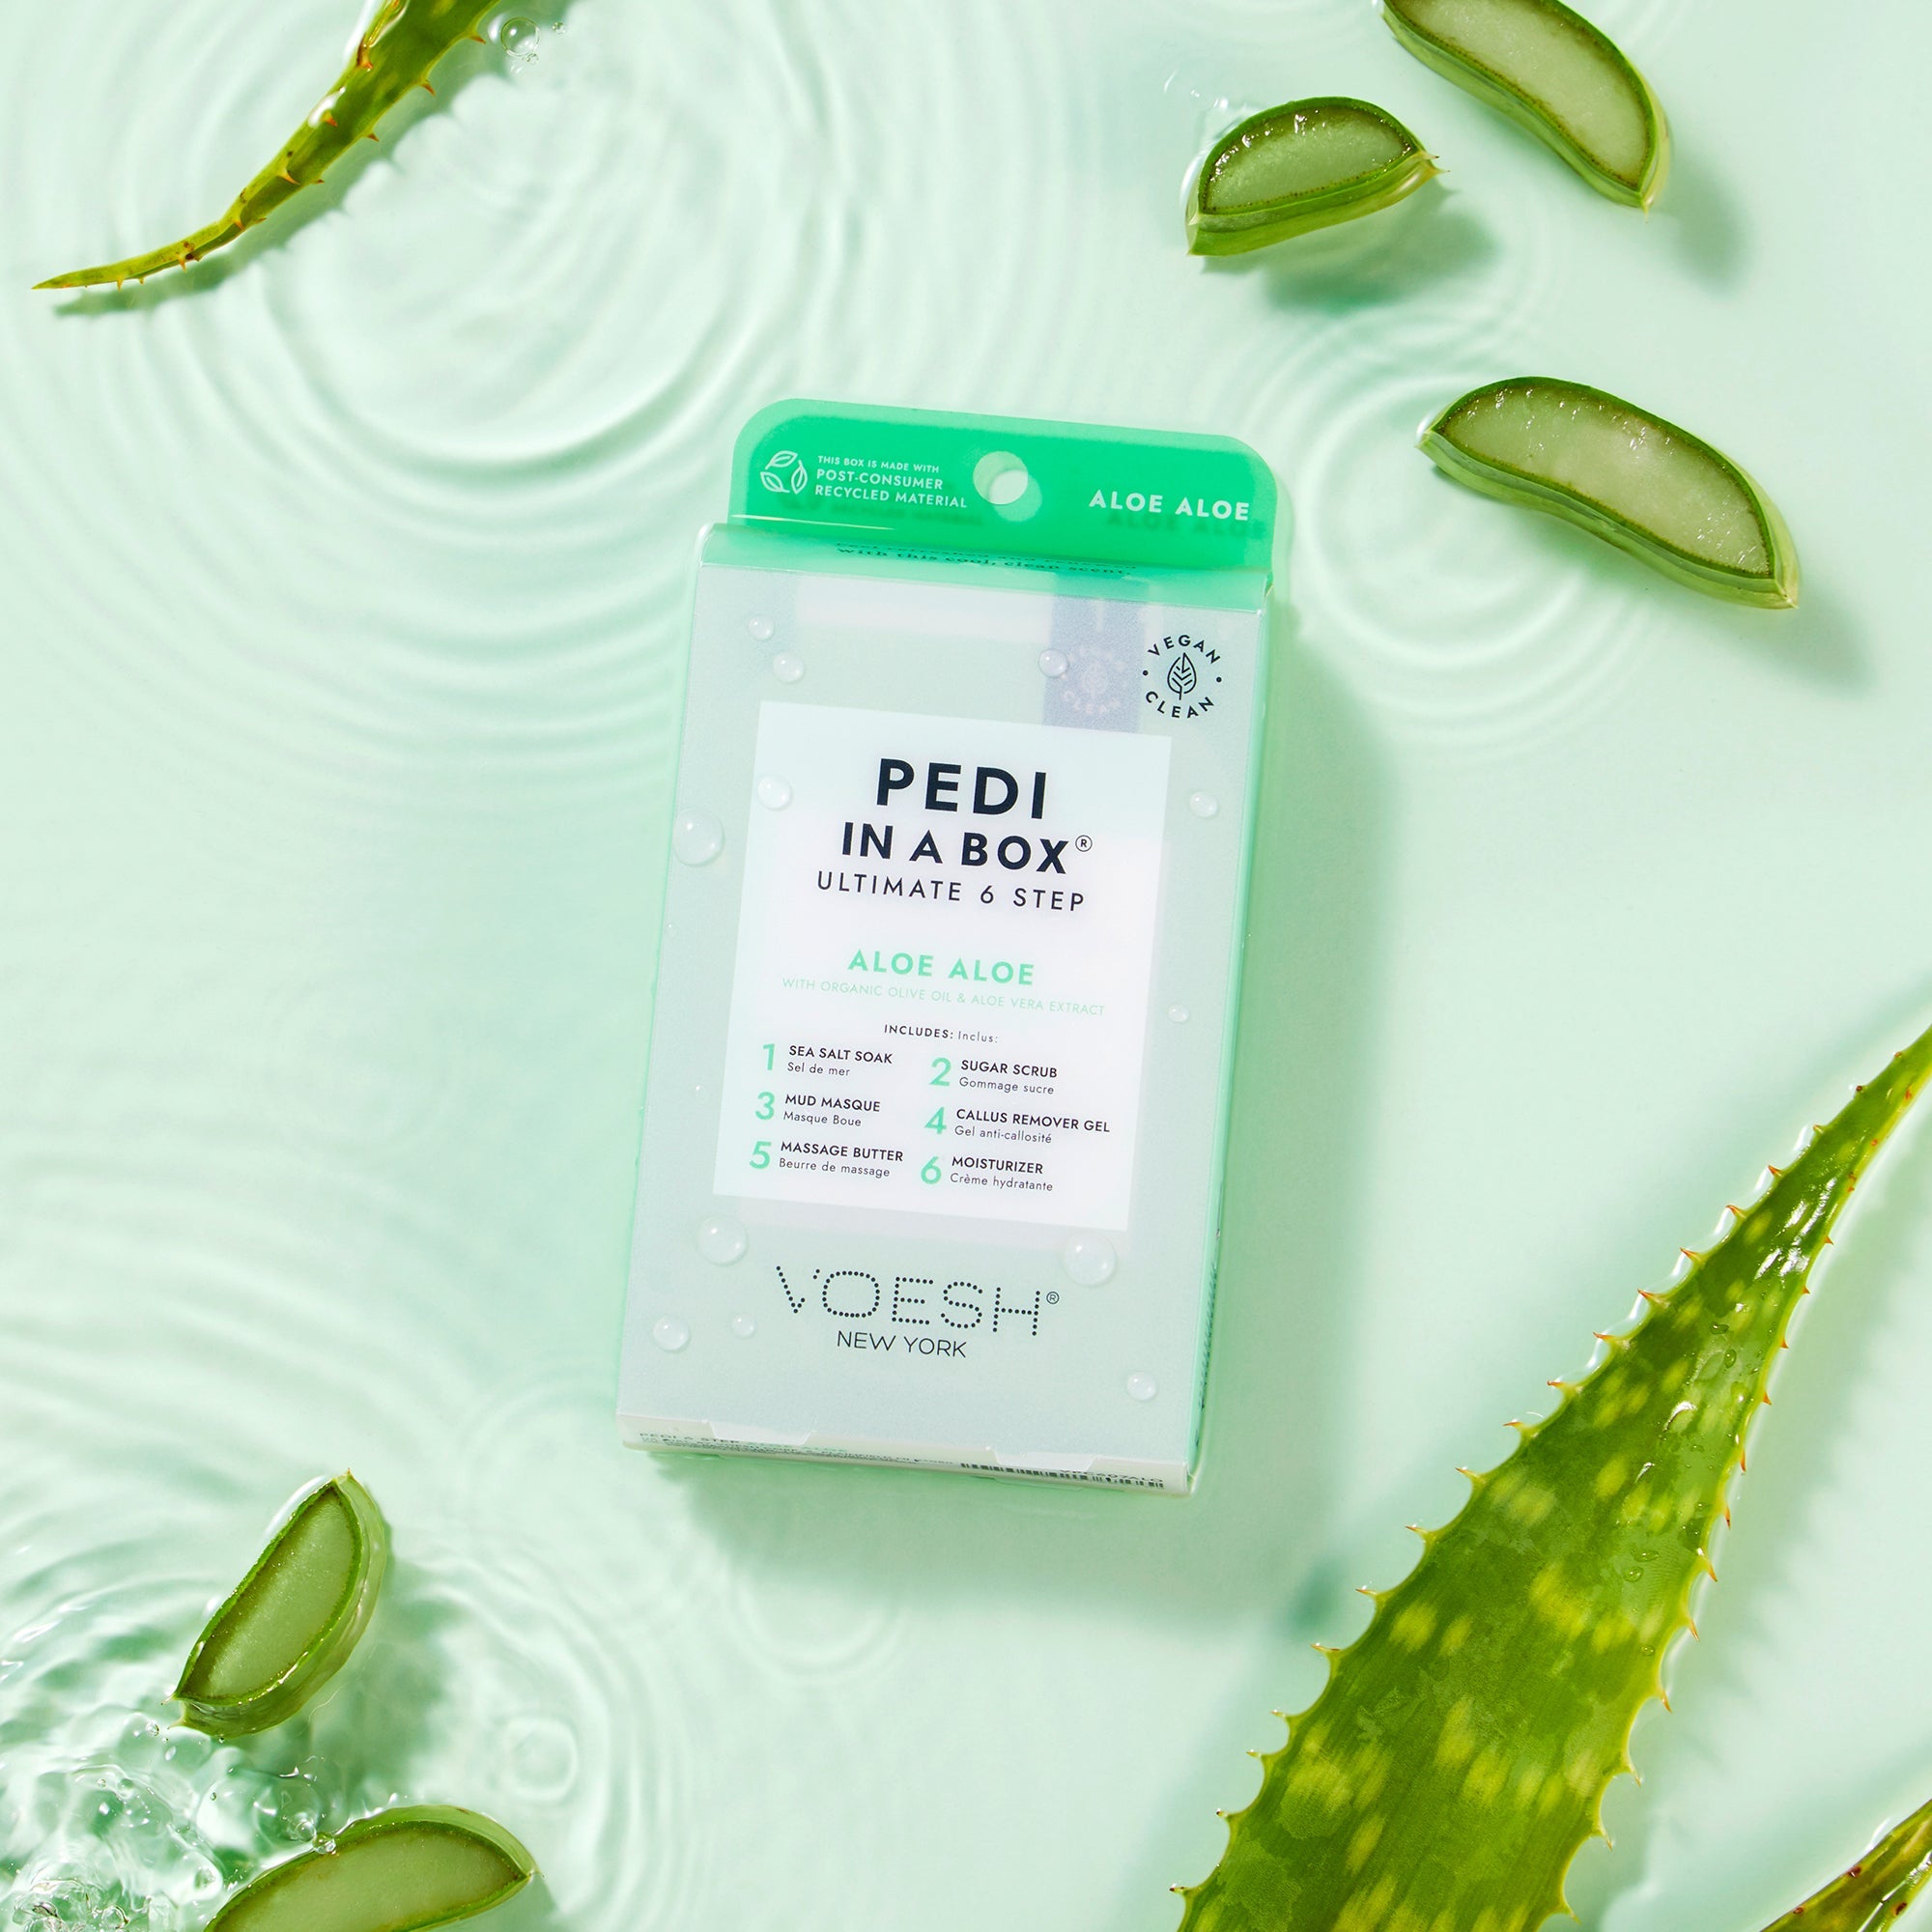 Pedi In a Box 6 Step Aloe Aloe in water with aloe pieces, light green background